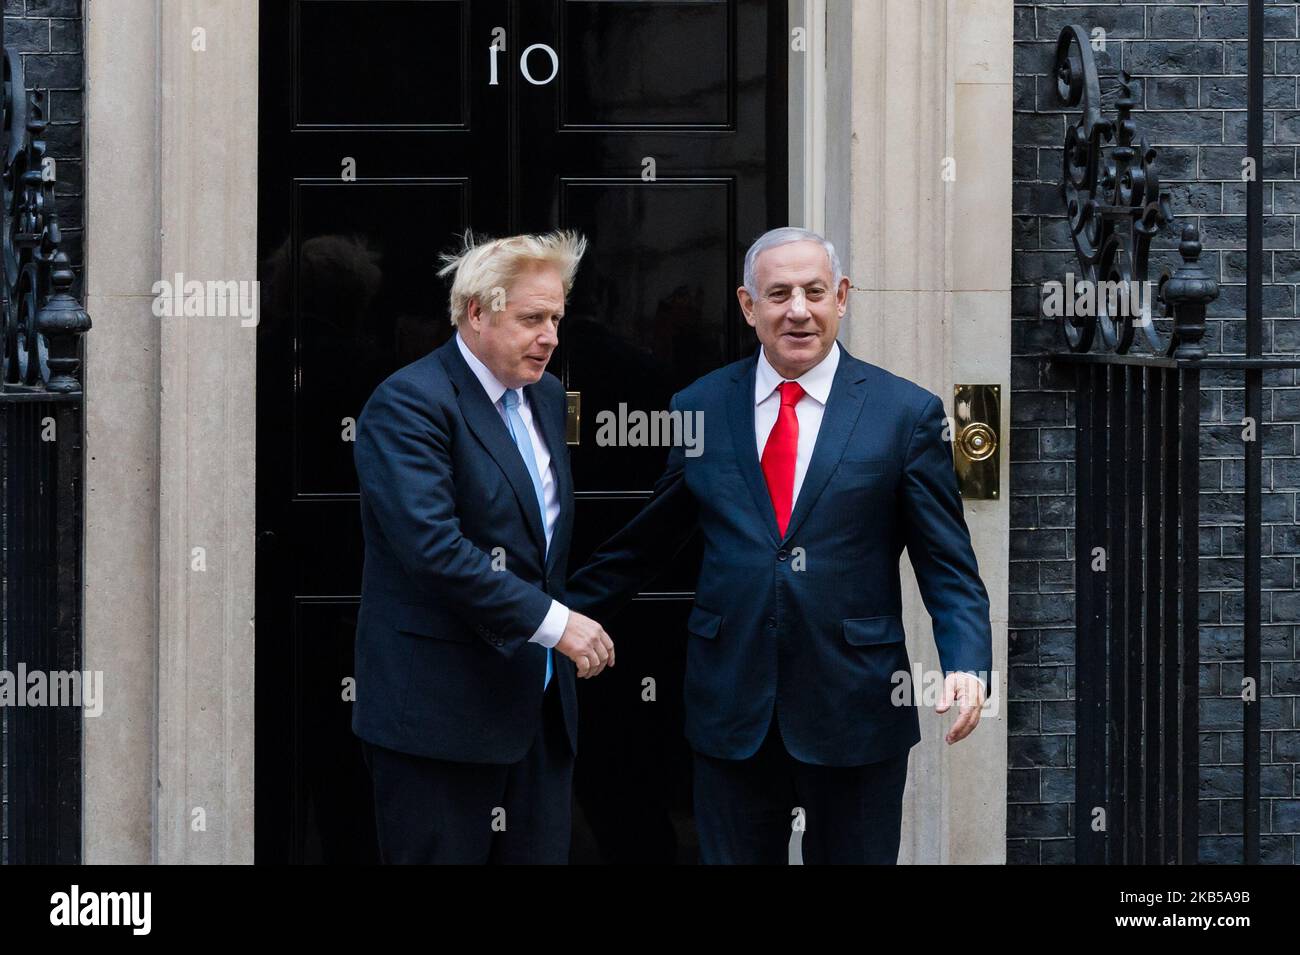 Israeli Prime Minister Benjamin Netanyahu (R) arrives in 10 Downing Street for talks with British Prime Minister Boris Johnson (L) on 05 September 2019 in London, England. The meeting is set to focus on discussing tensions in the Middle East and Iran's influence in the region. (Photo by WIktor Szymanowicz/NurPhoto) Stock Photo